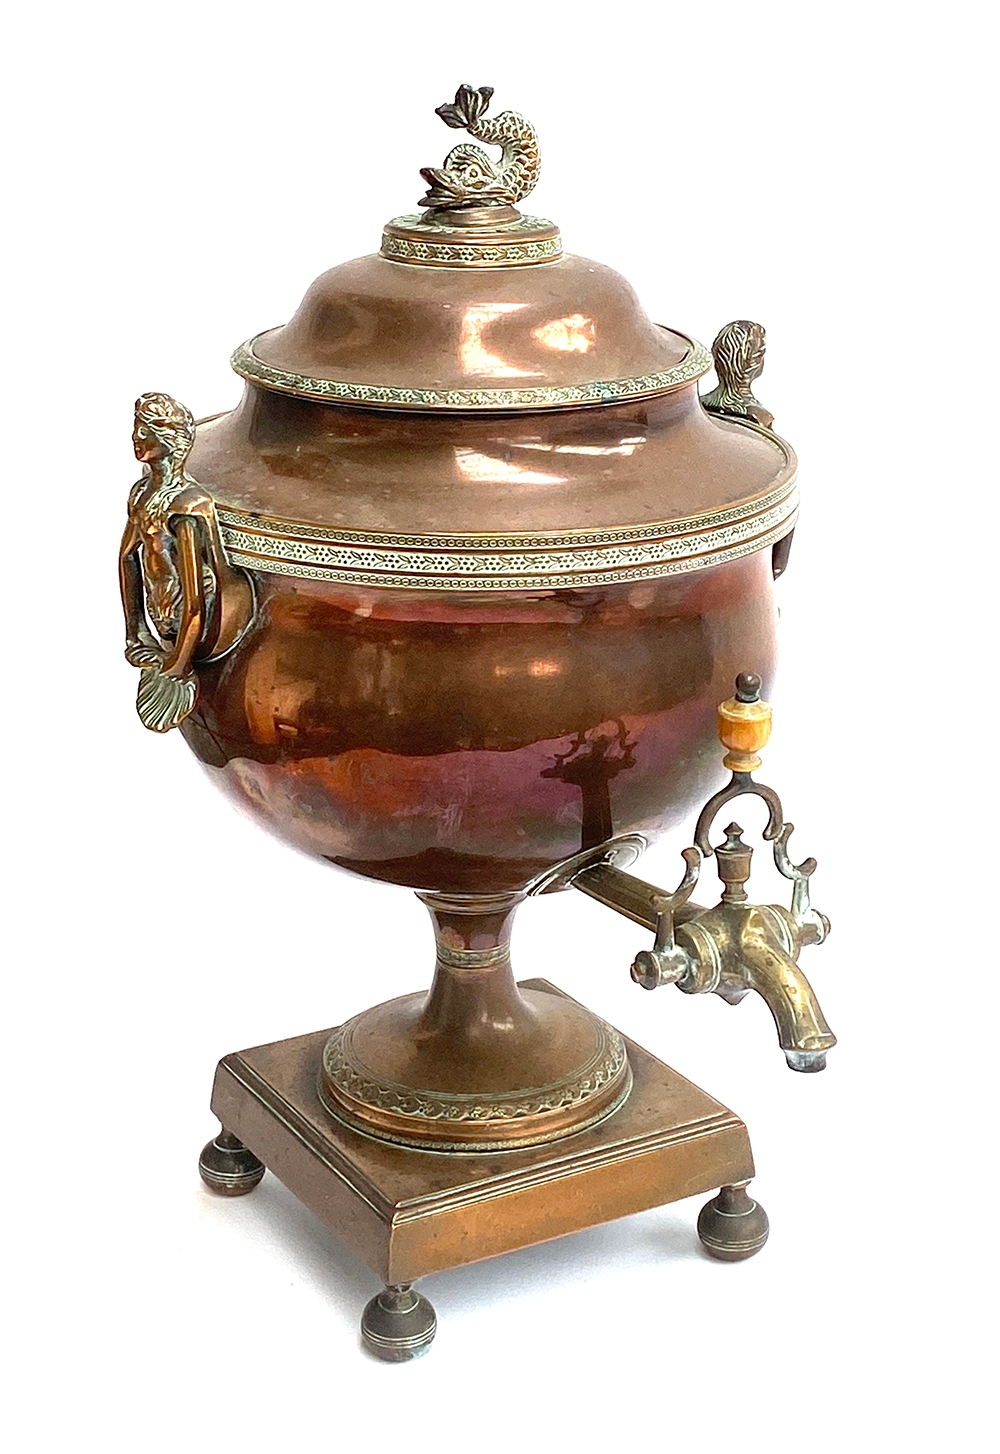 A 19th century copper and brass samovar with dolphin finial and mermaid handles, 37cmH - Image 2 of 3